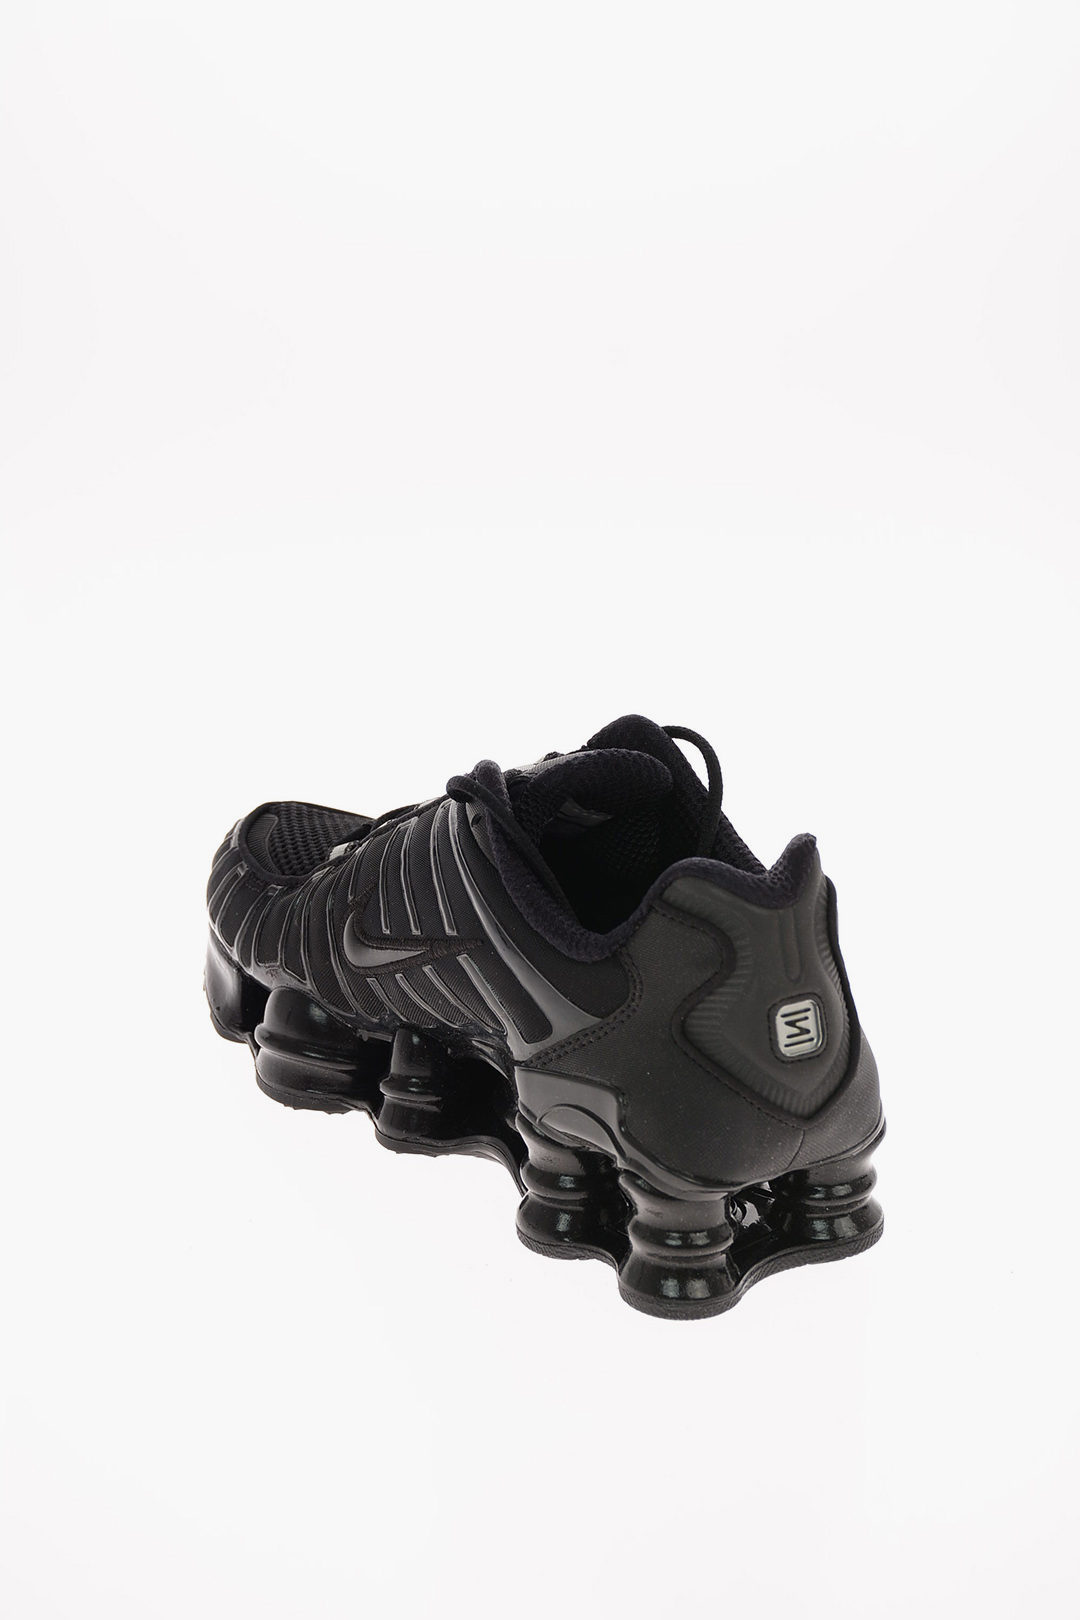 nike outlet shox